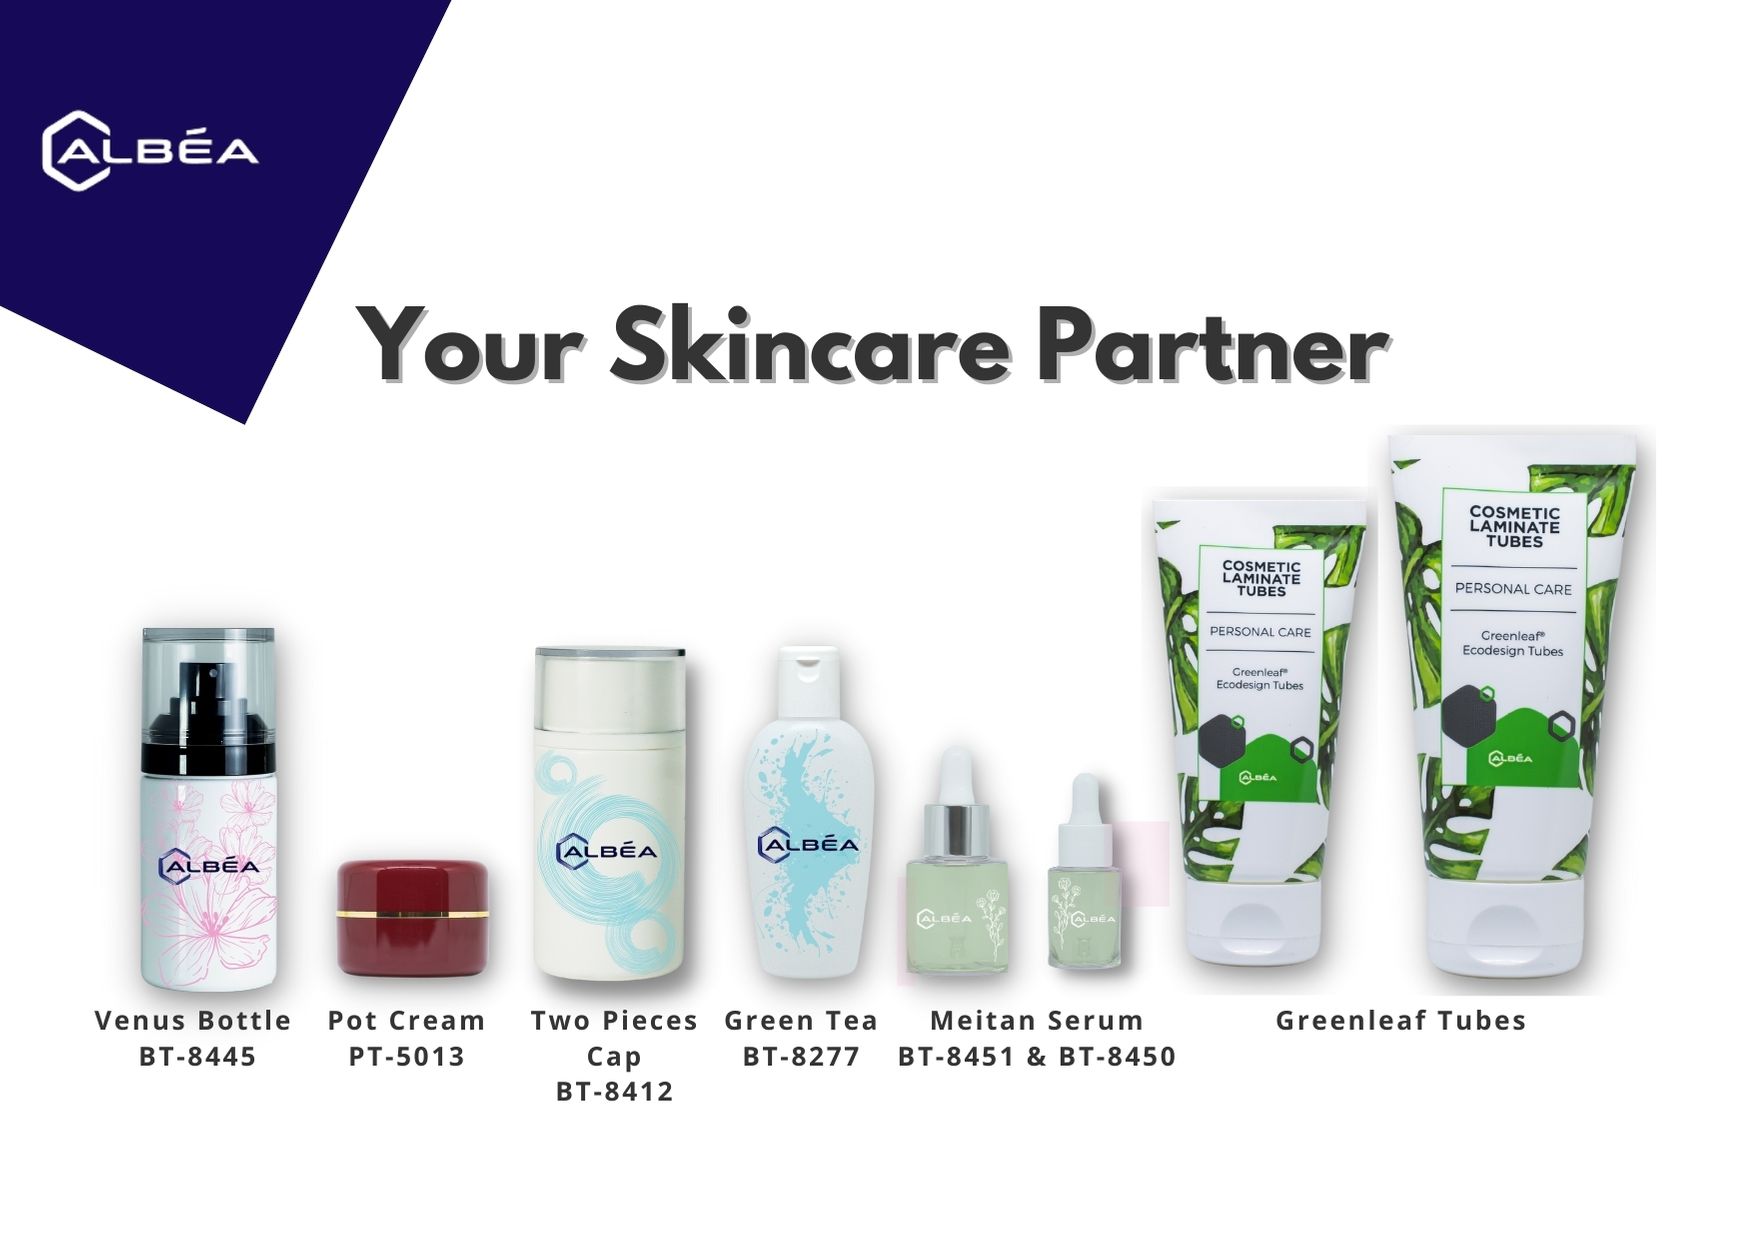 Your Skincare Partner image